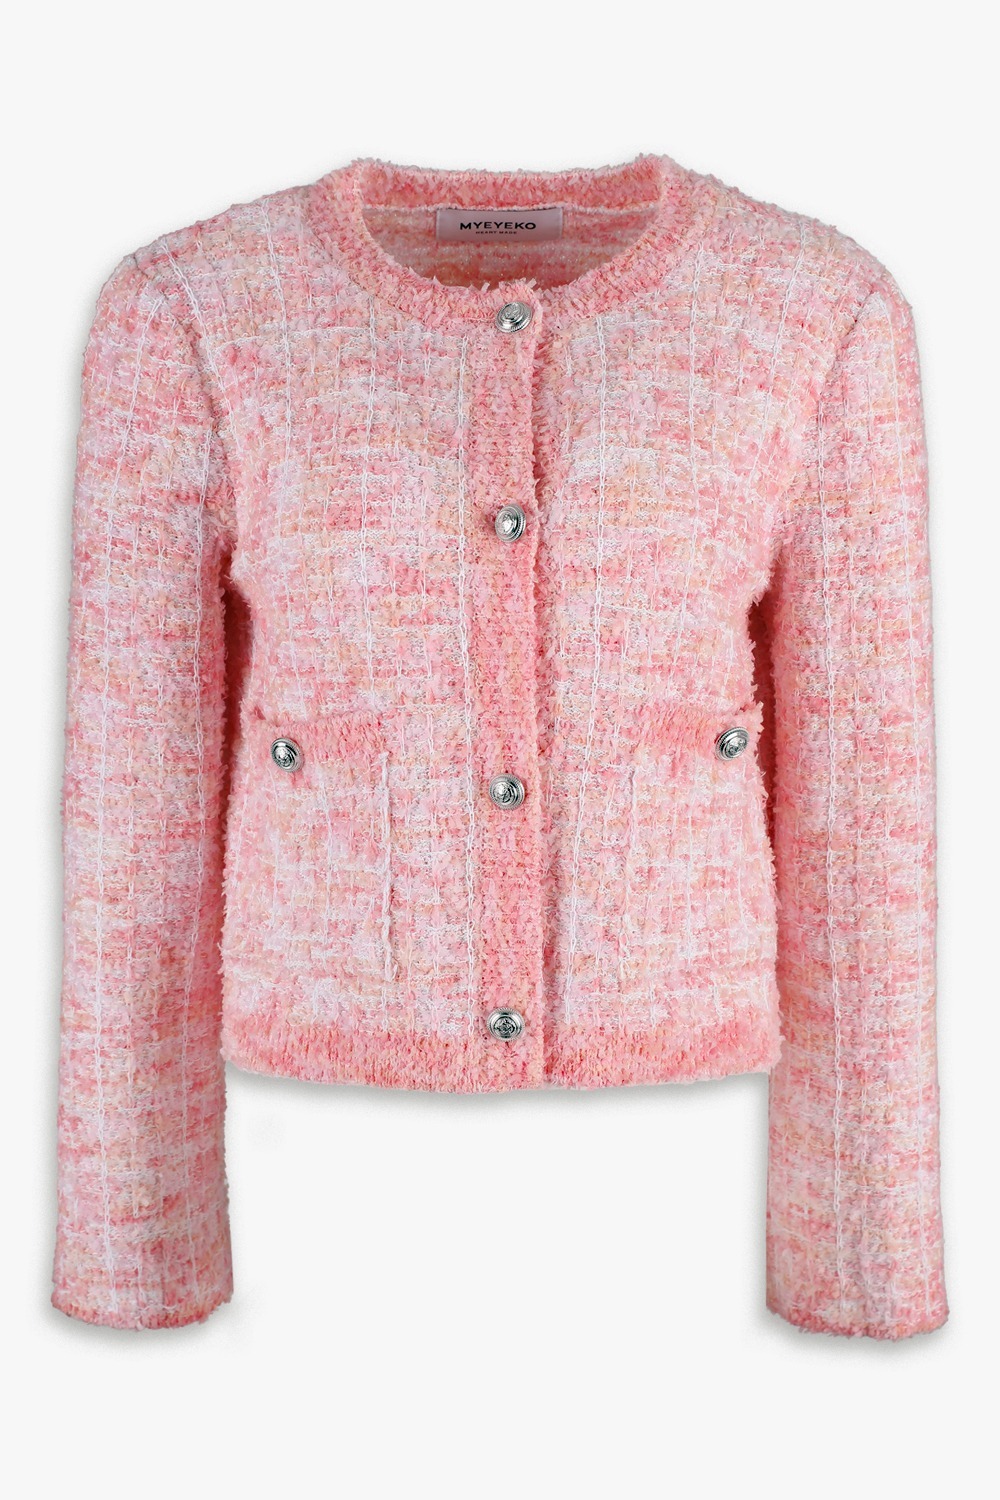 HIGH QUALITY LINE - PINK BLOSSOM Tweed Knit Jacket